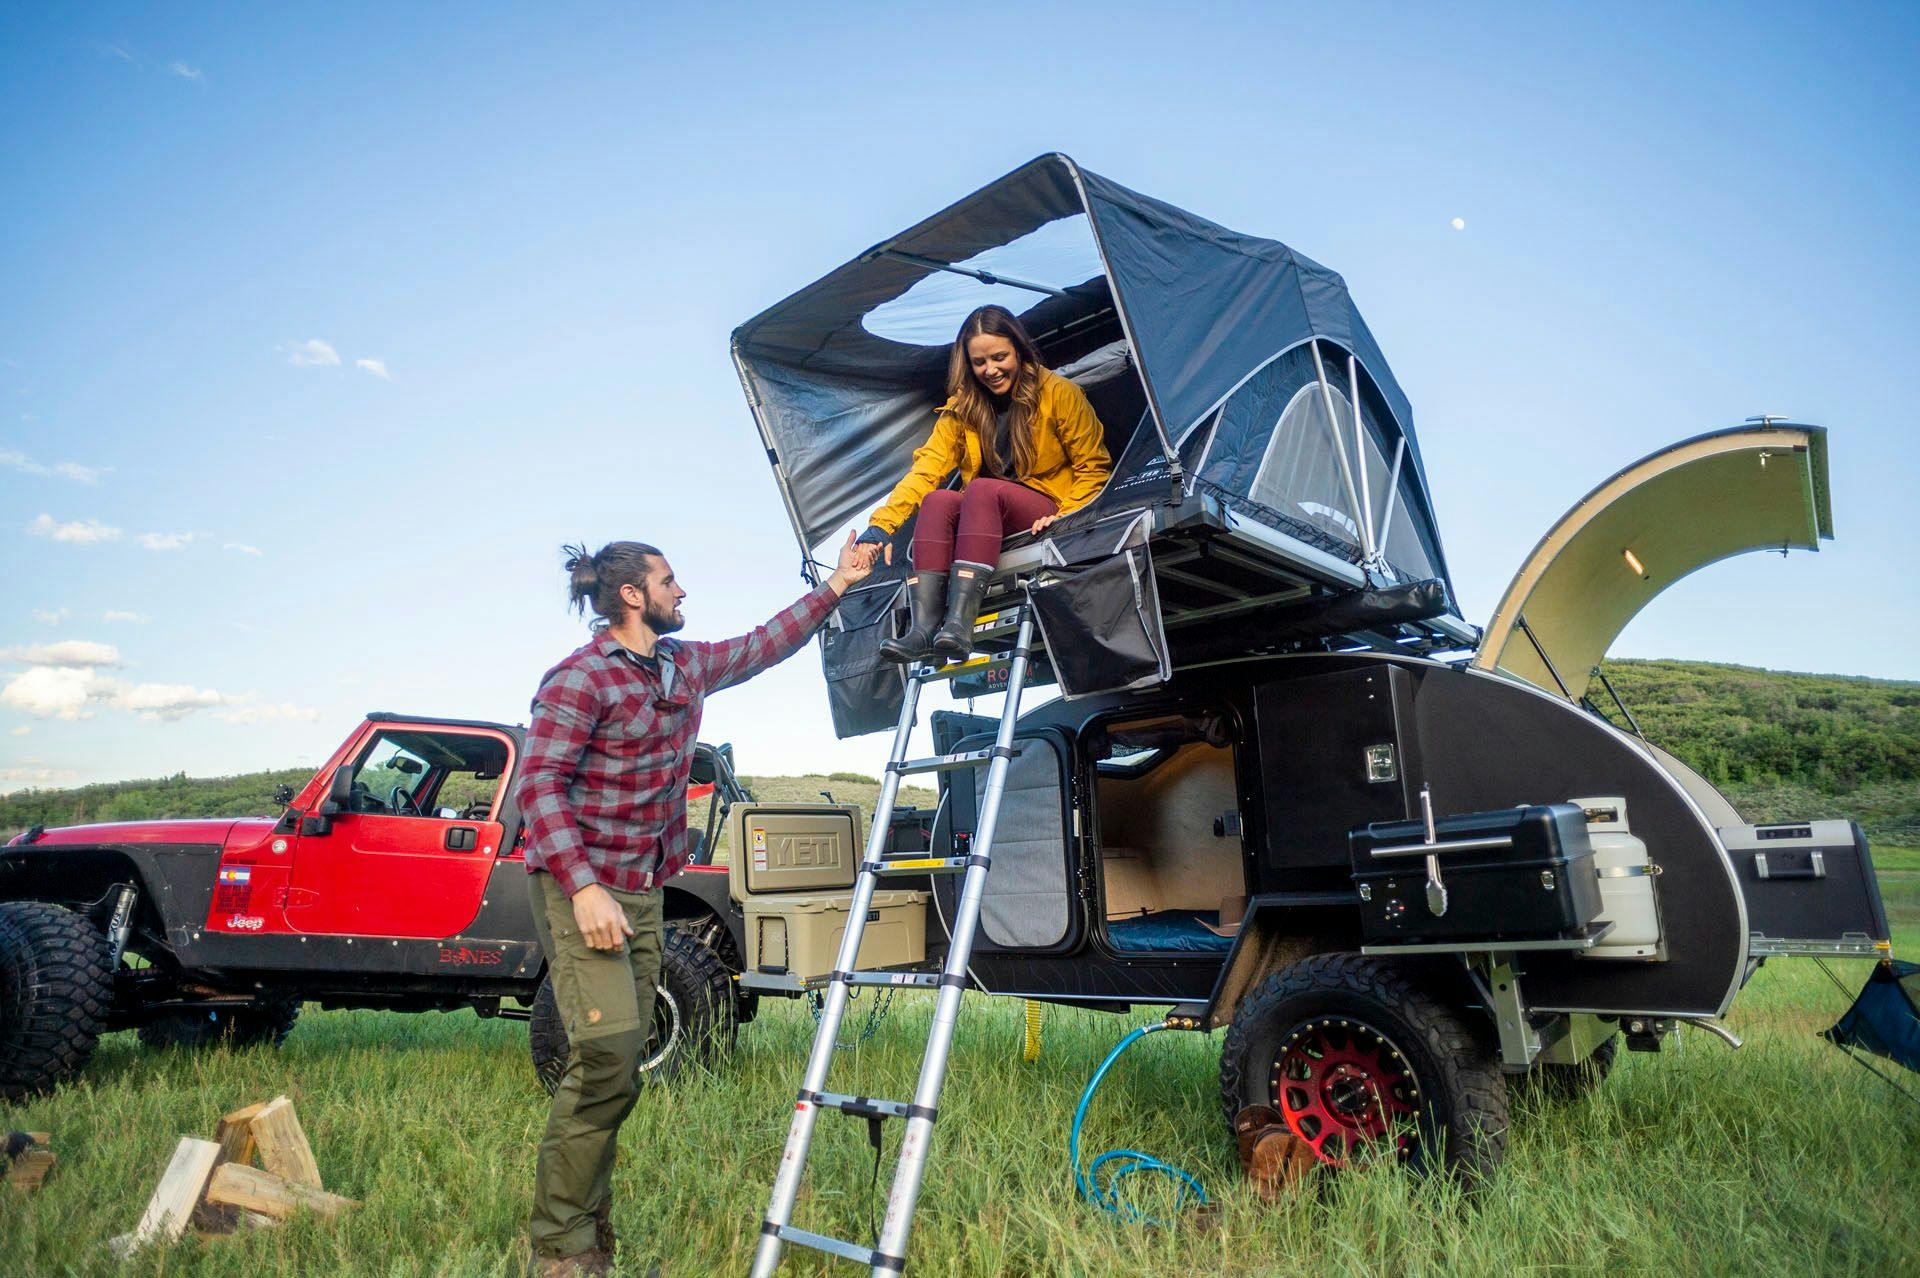 A man in a red plaid shirt, helps a woman in a yellow rain jacket, down the ladder of a rooftop tent on top of an Escapod Original TOPO teardrop trailer.